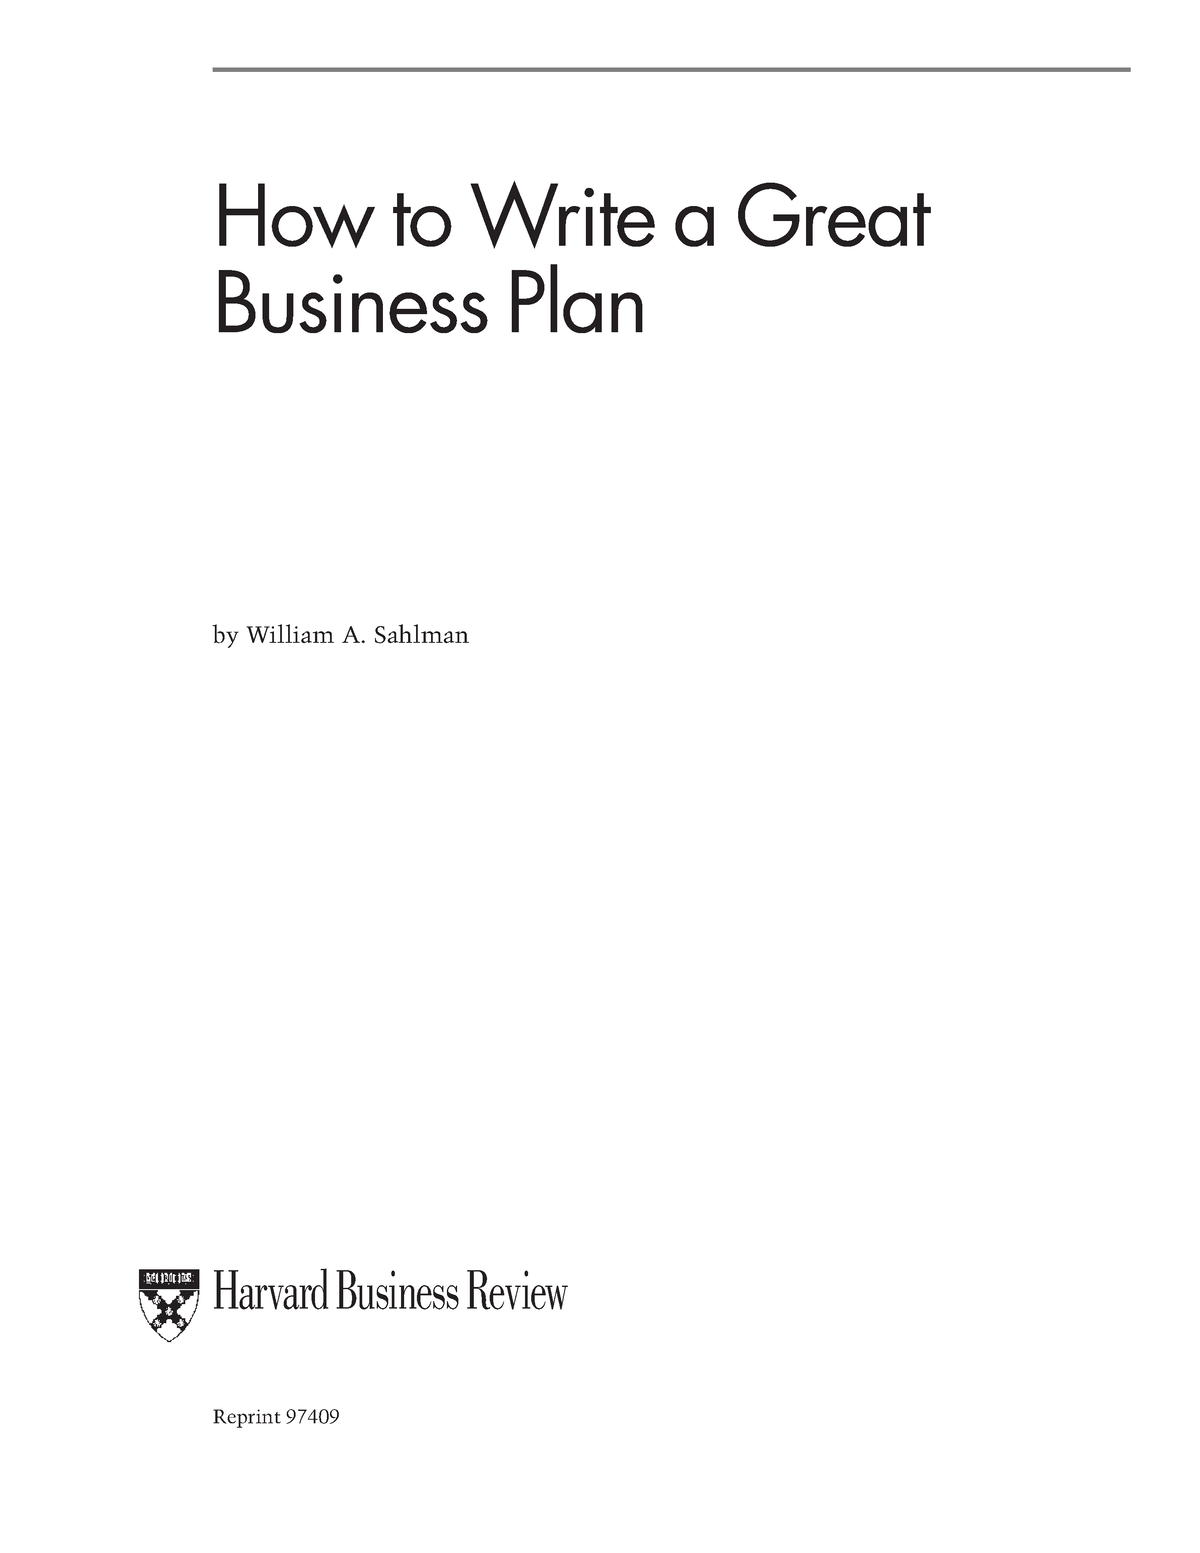 how to write a great business plan william a sahlman